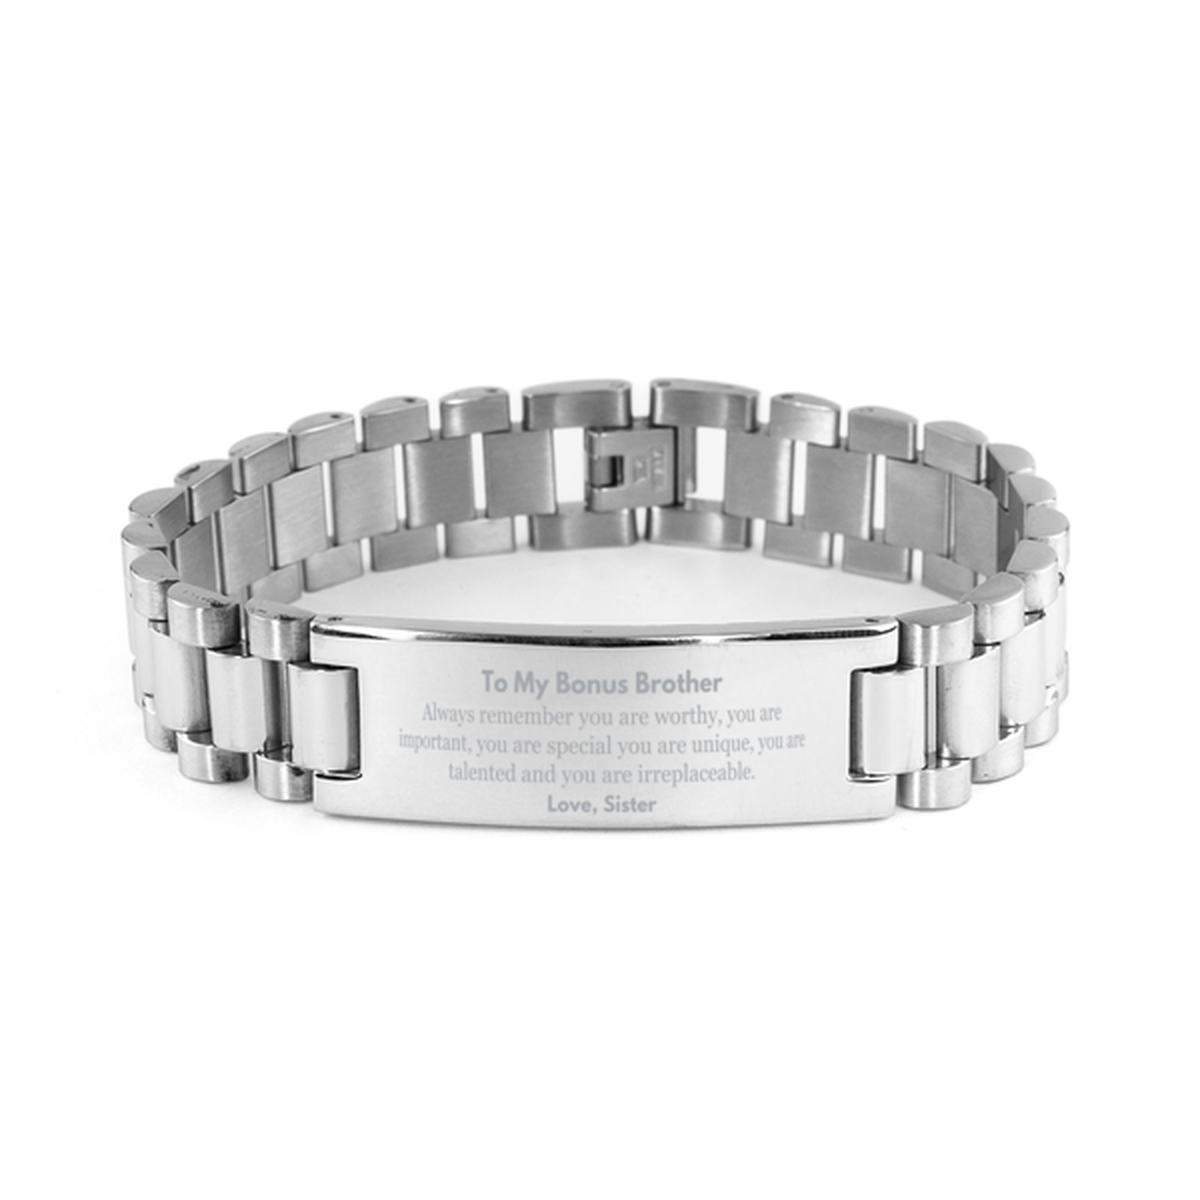 Bonus Brother Birthday Gifts from Sister, Inspirational Ladder Stainless Steel Bracelet for Bonus Brother Christmas Graduation Gifts for Bonus Brother Always remember you are worthy, you are important. Love, Sister